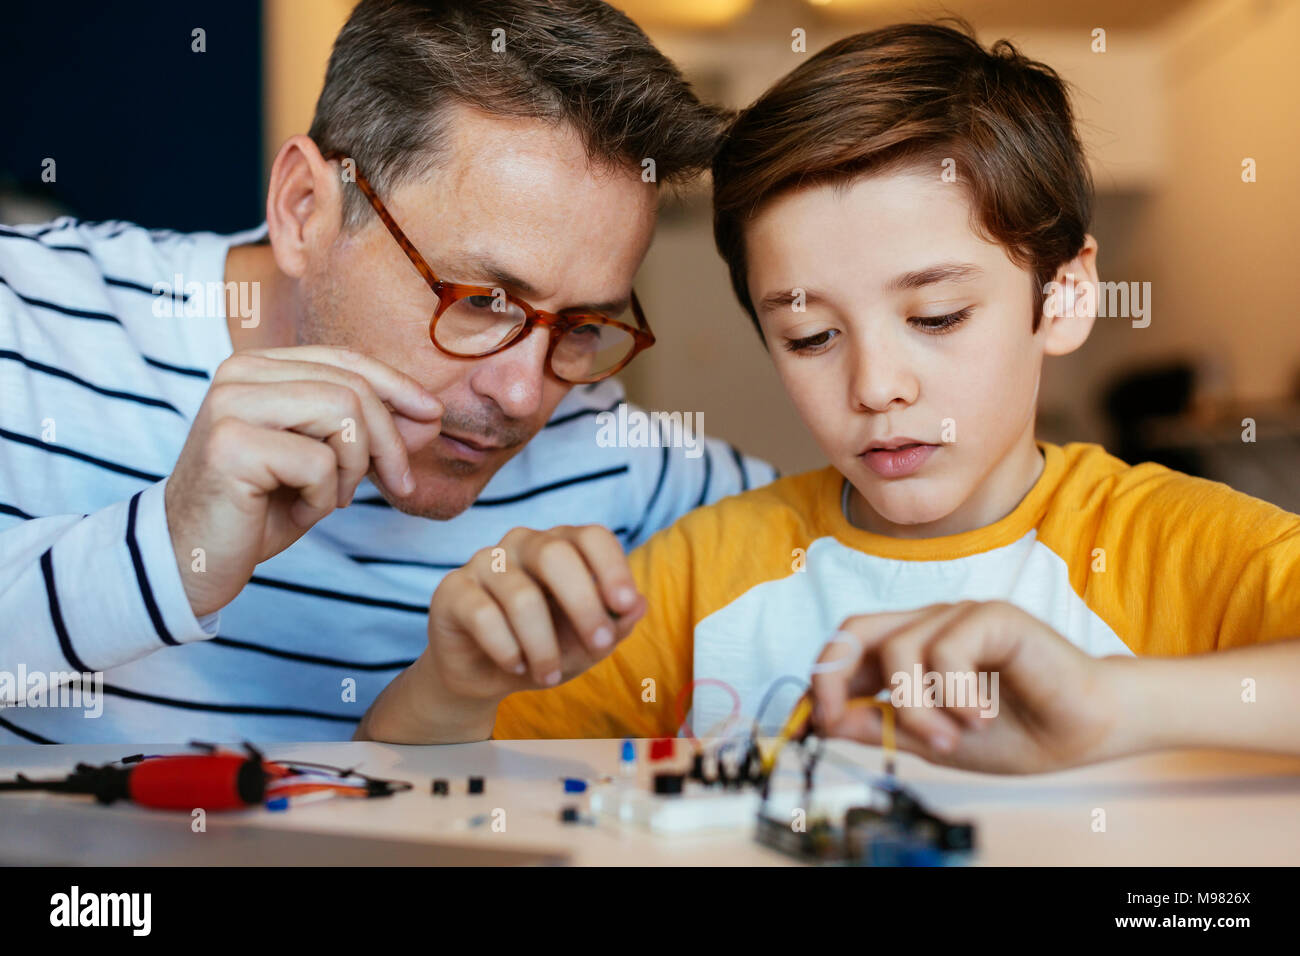 Father and son assembling an electronic construction kit Stock Photo